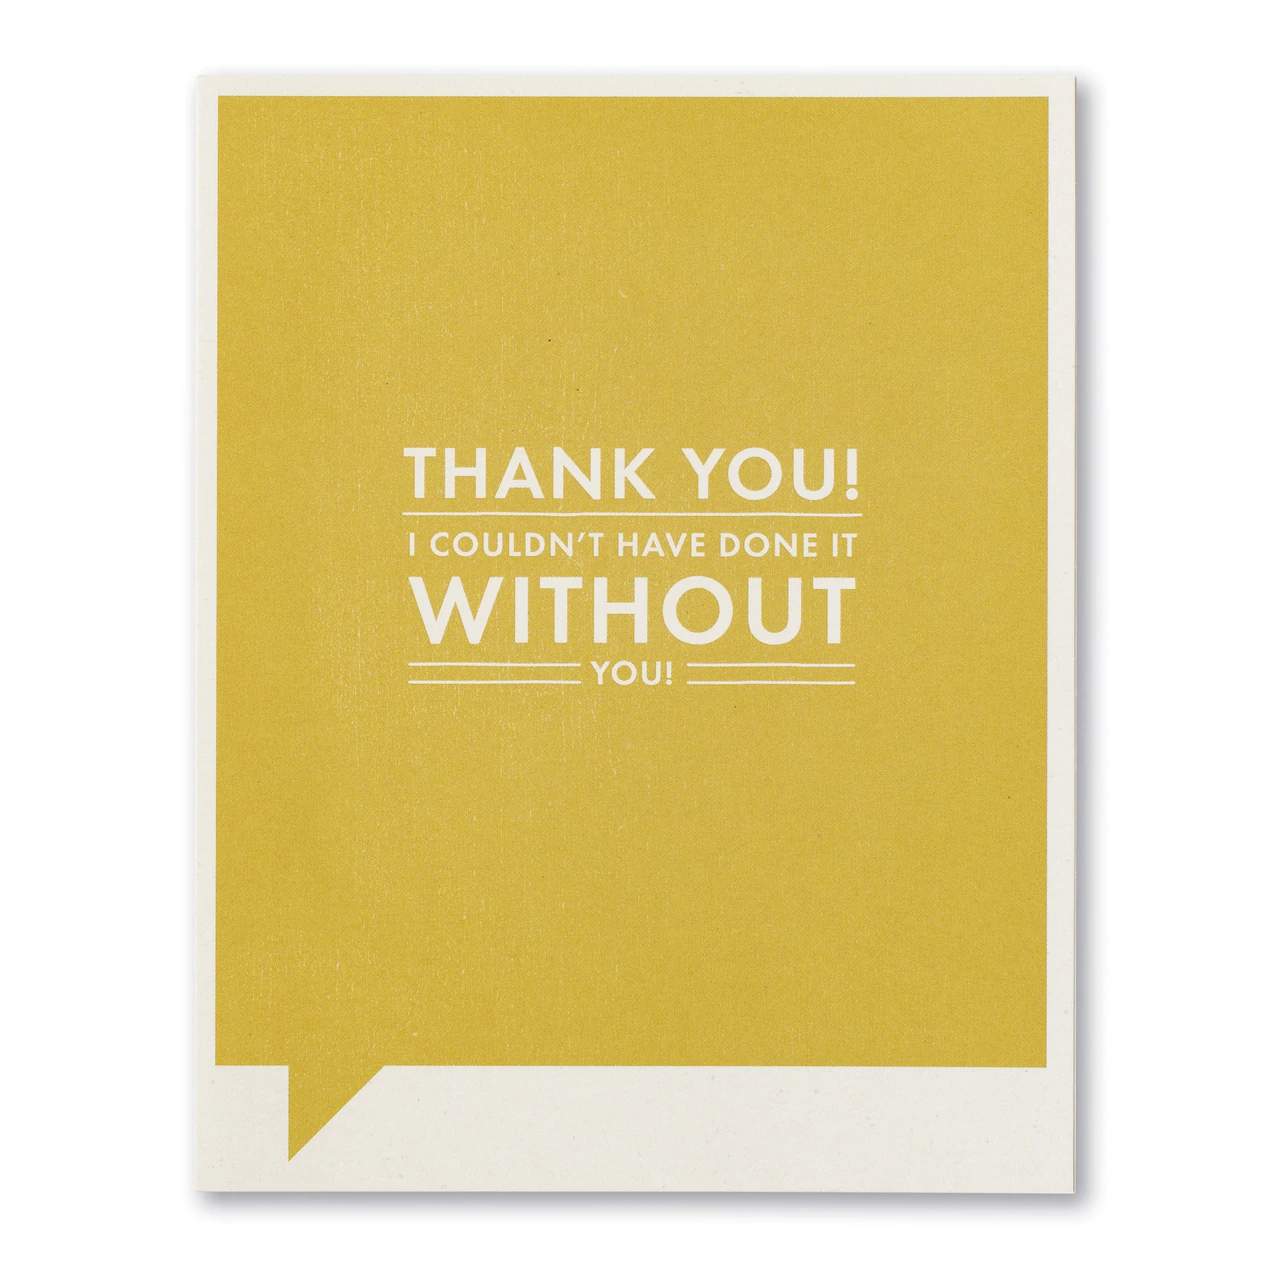 Frank and Funny Greeting Card - Thank You - Thank You! I Couldn't Have Done It Without You! - I Don't Have Crow's Feet - Mellow Monkey